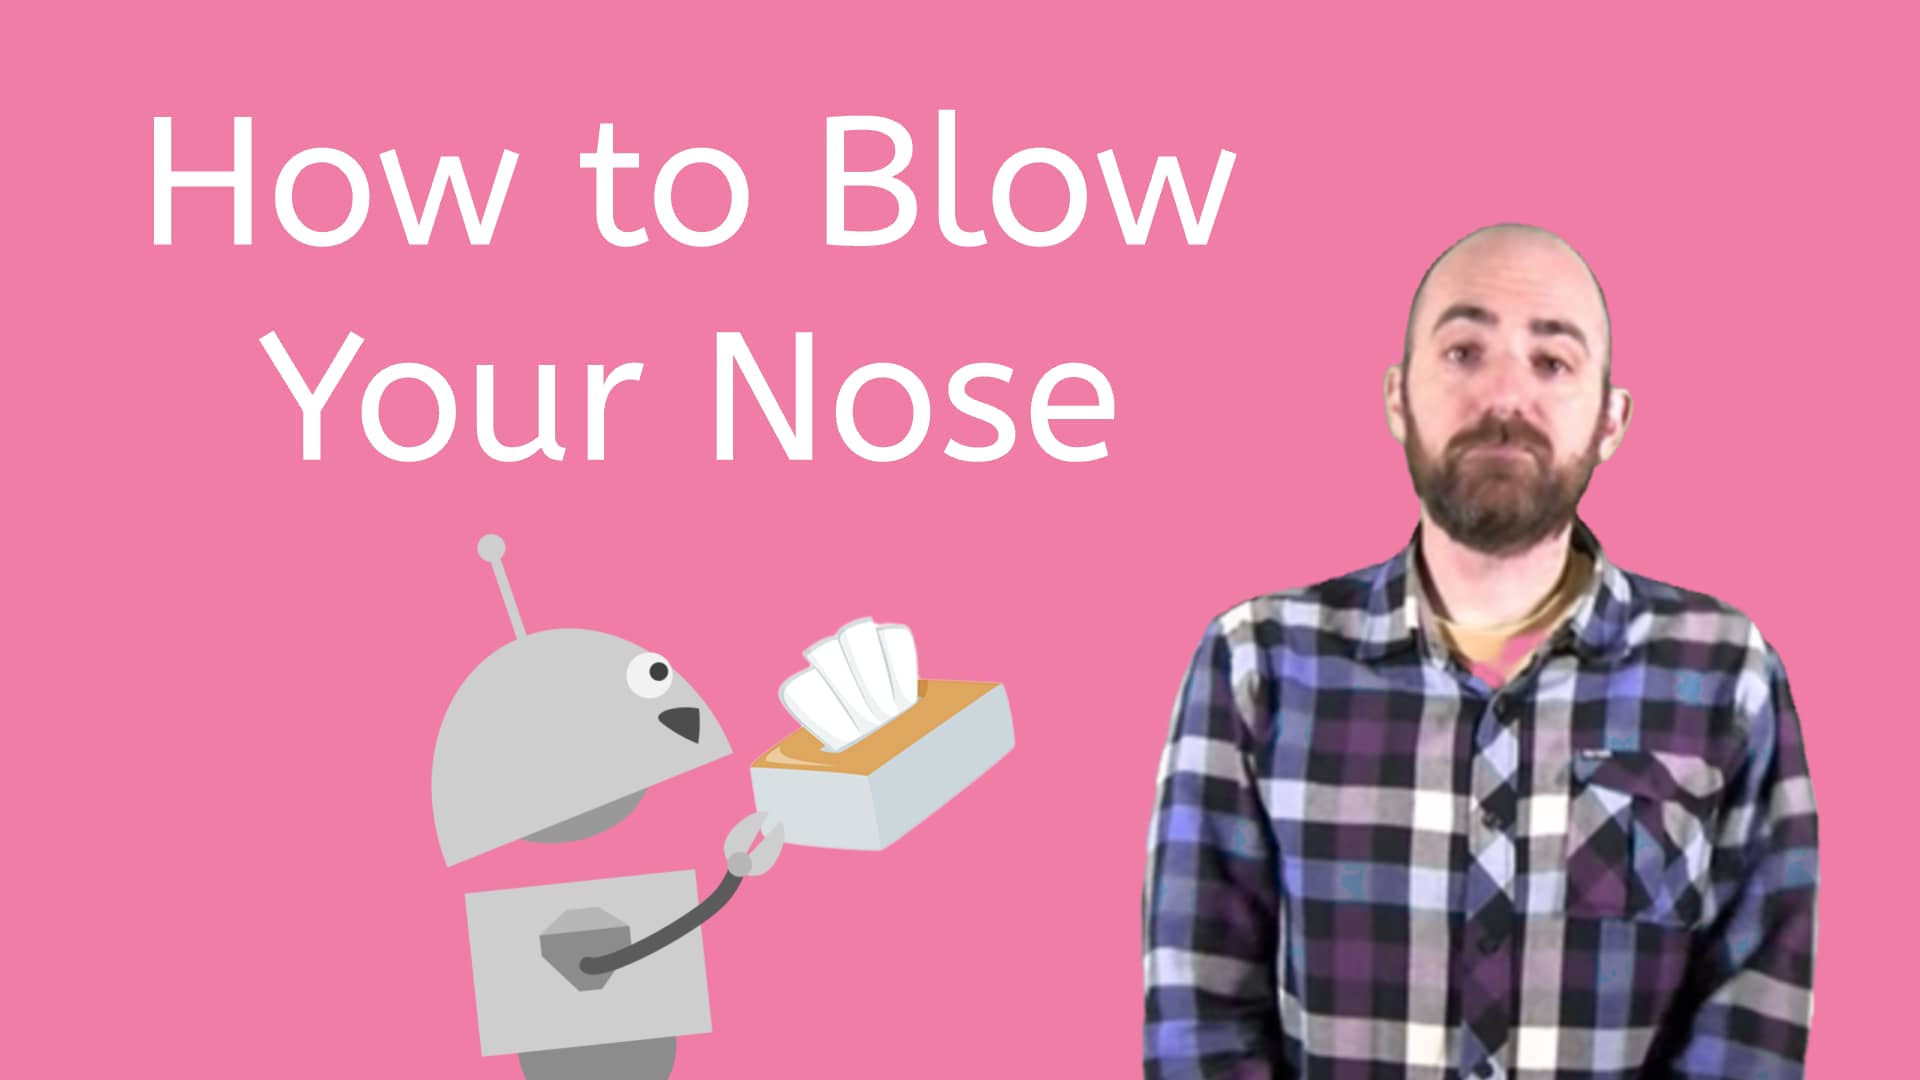 How To Blow Your Nose On Vimeo